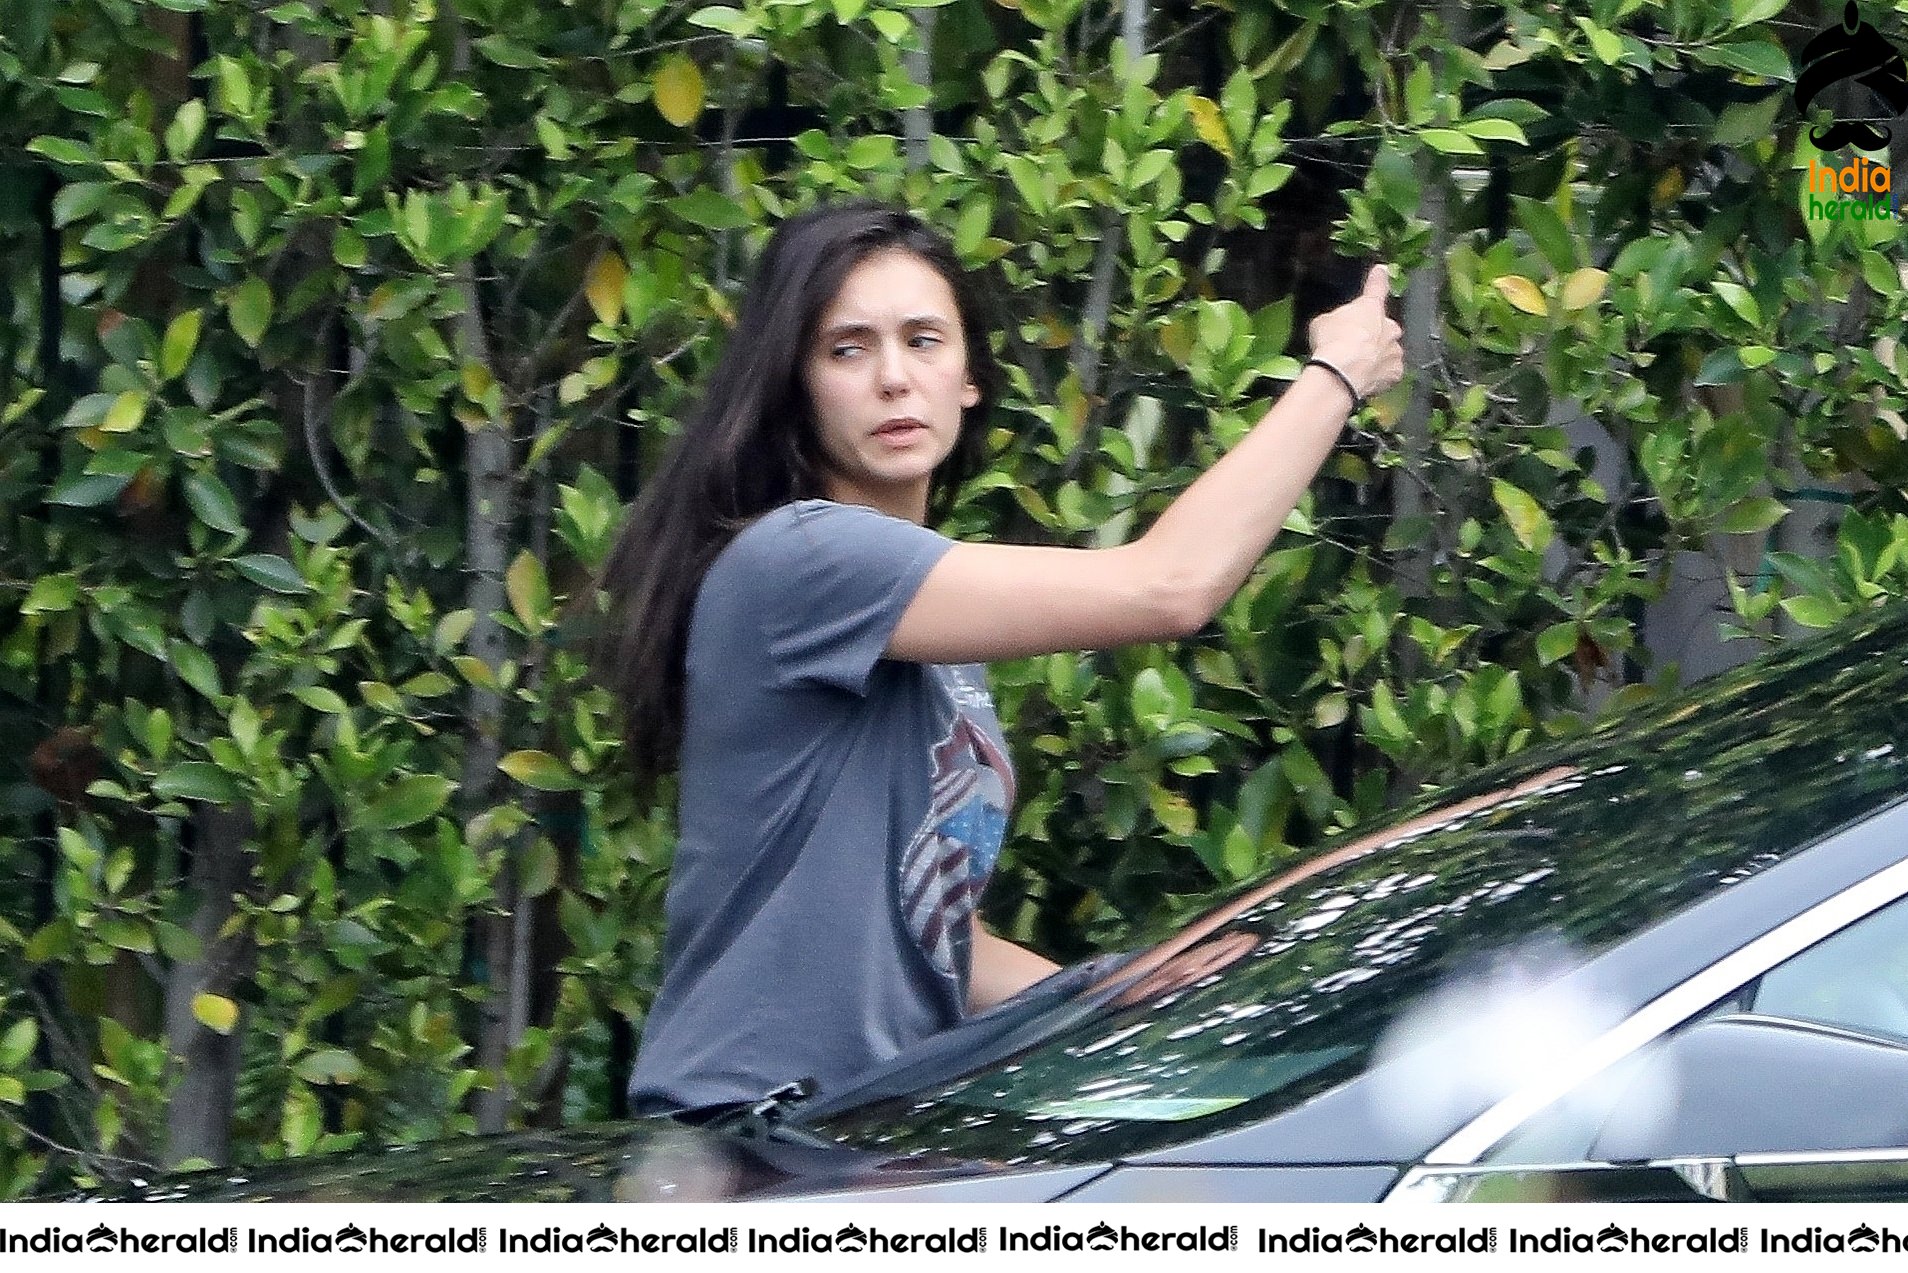 Nina Dobrev caught by Paparazzi while carrying furniture to a car in Los Angeles